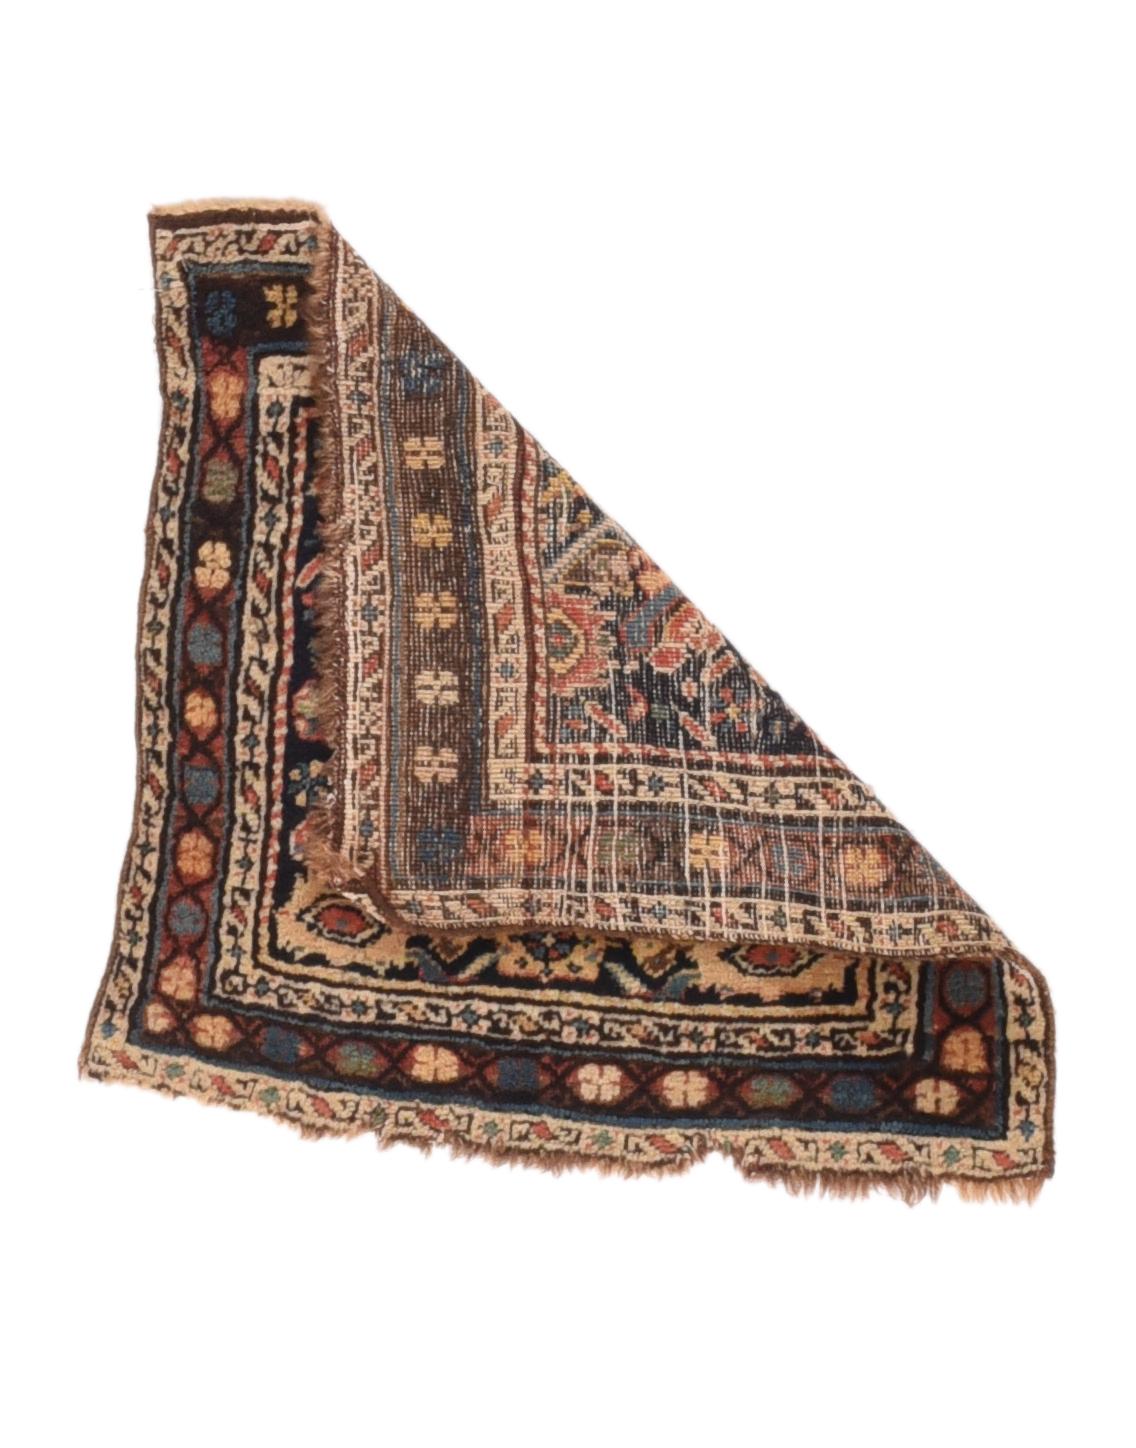 Antique Kurdish Rug 1'9'' x 1'9''. The near black field shows a vertically slipped section of the Herati design, highlighted in straw, green and cream. Abrashed brown border with a rounded quincunx repeat on a linked open hexagon chain. S-chain